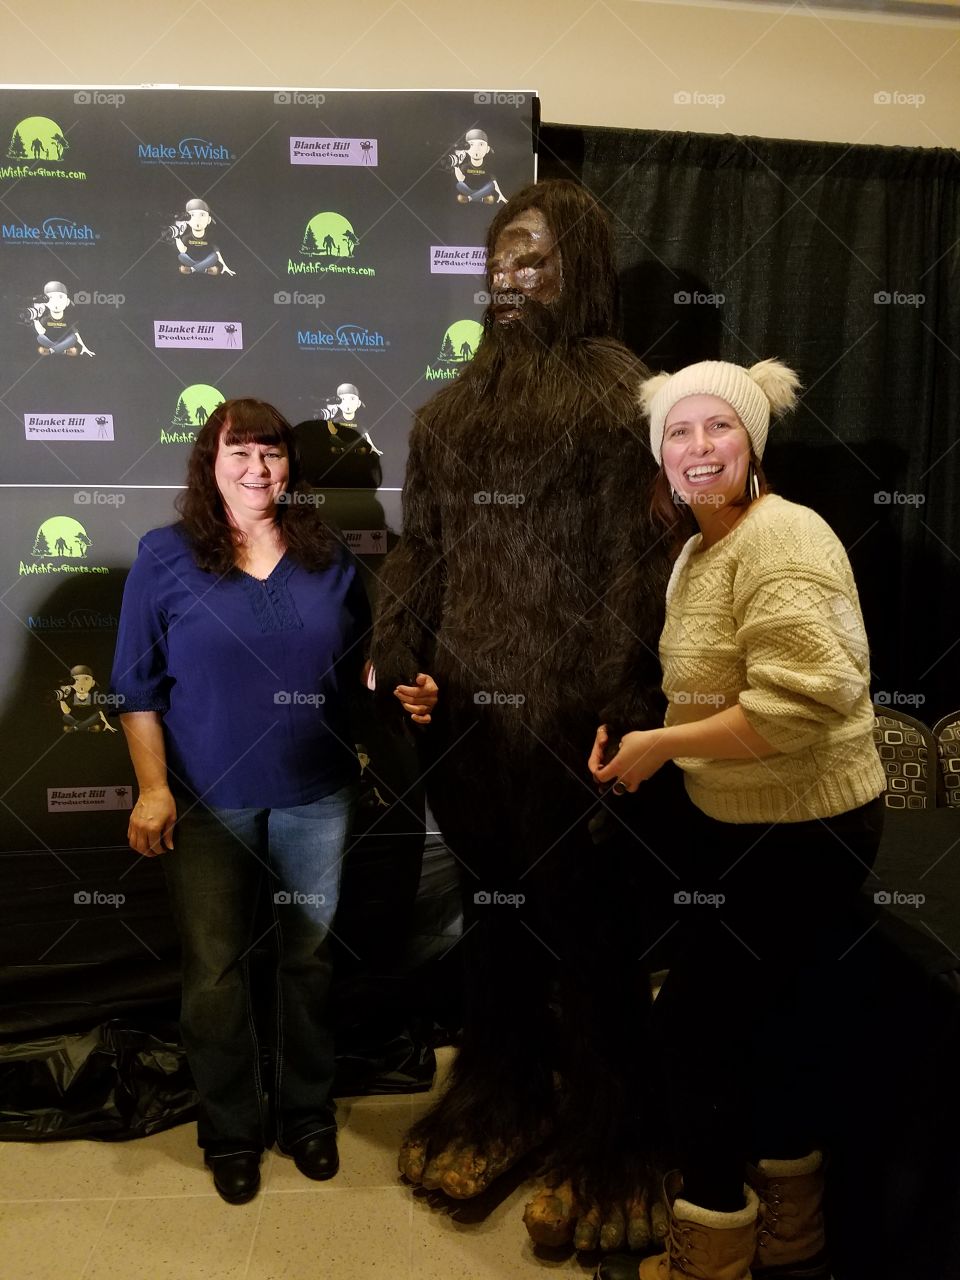 Hanging out with Bigfoot.